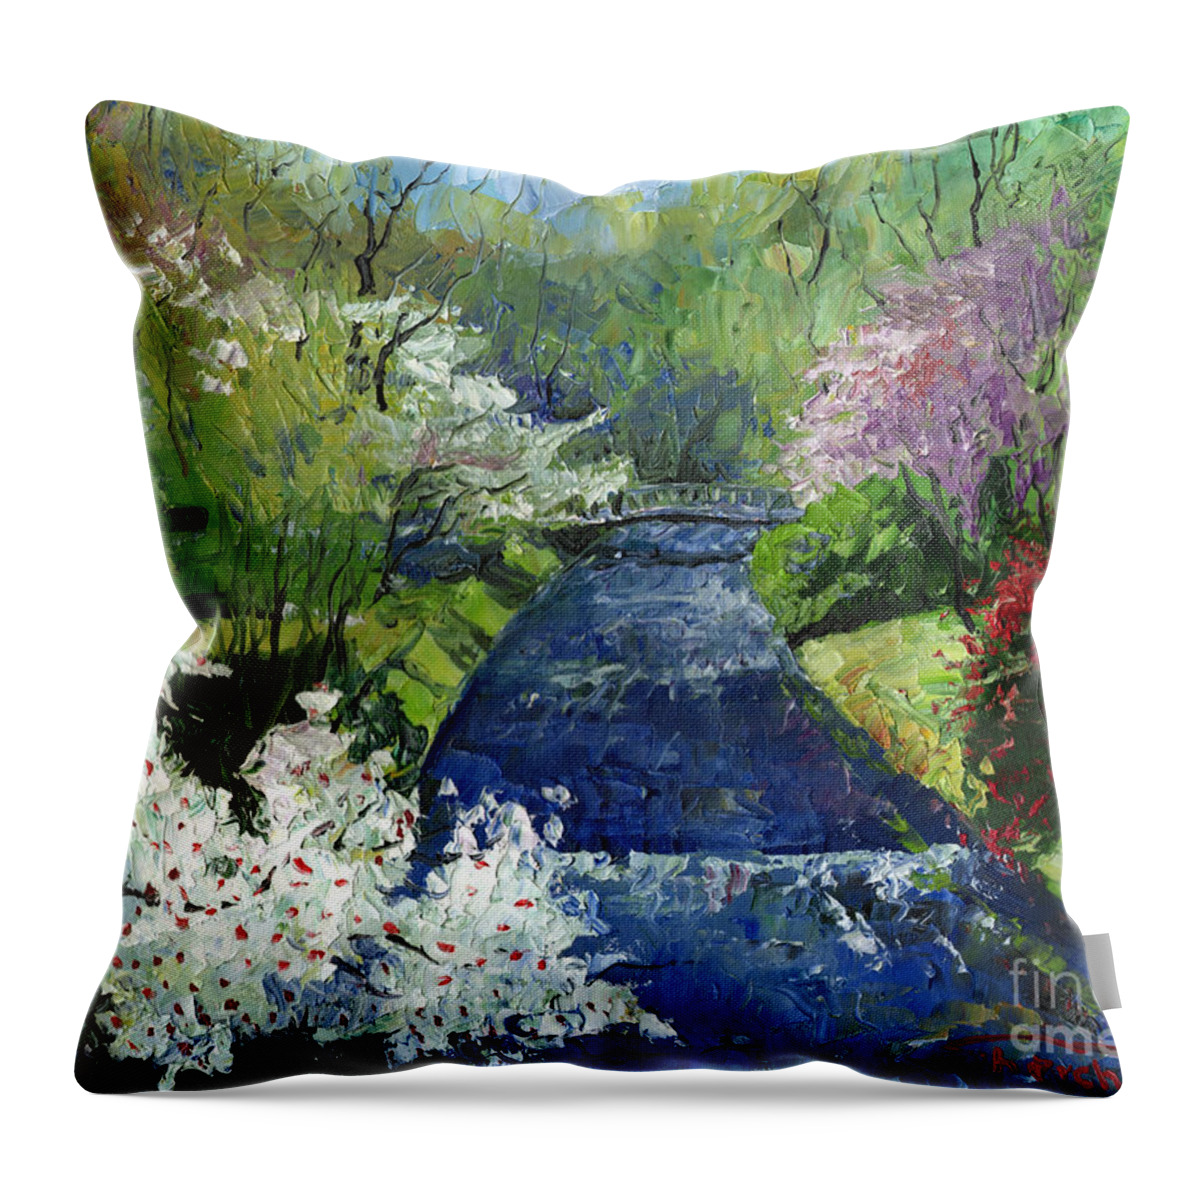 Oil Throw Pillow featuring the painting Germany Baden-Baden Spring by Yuriy Shevchuk